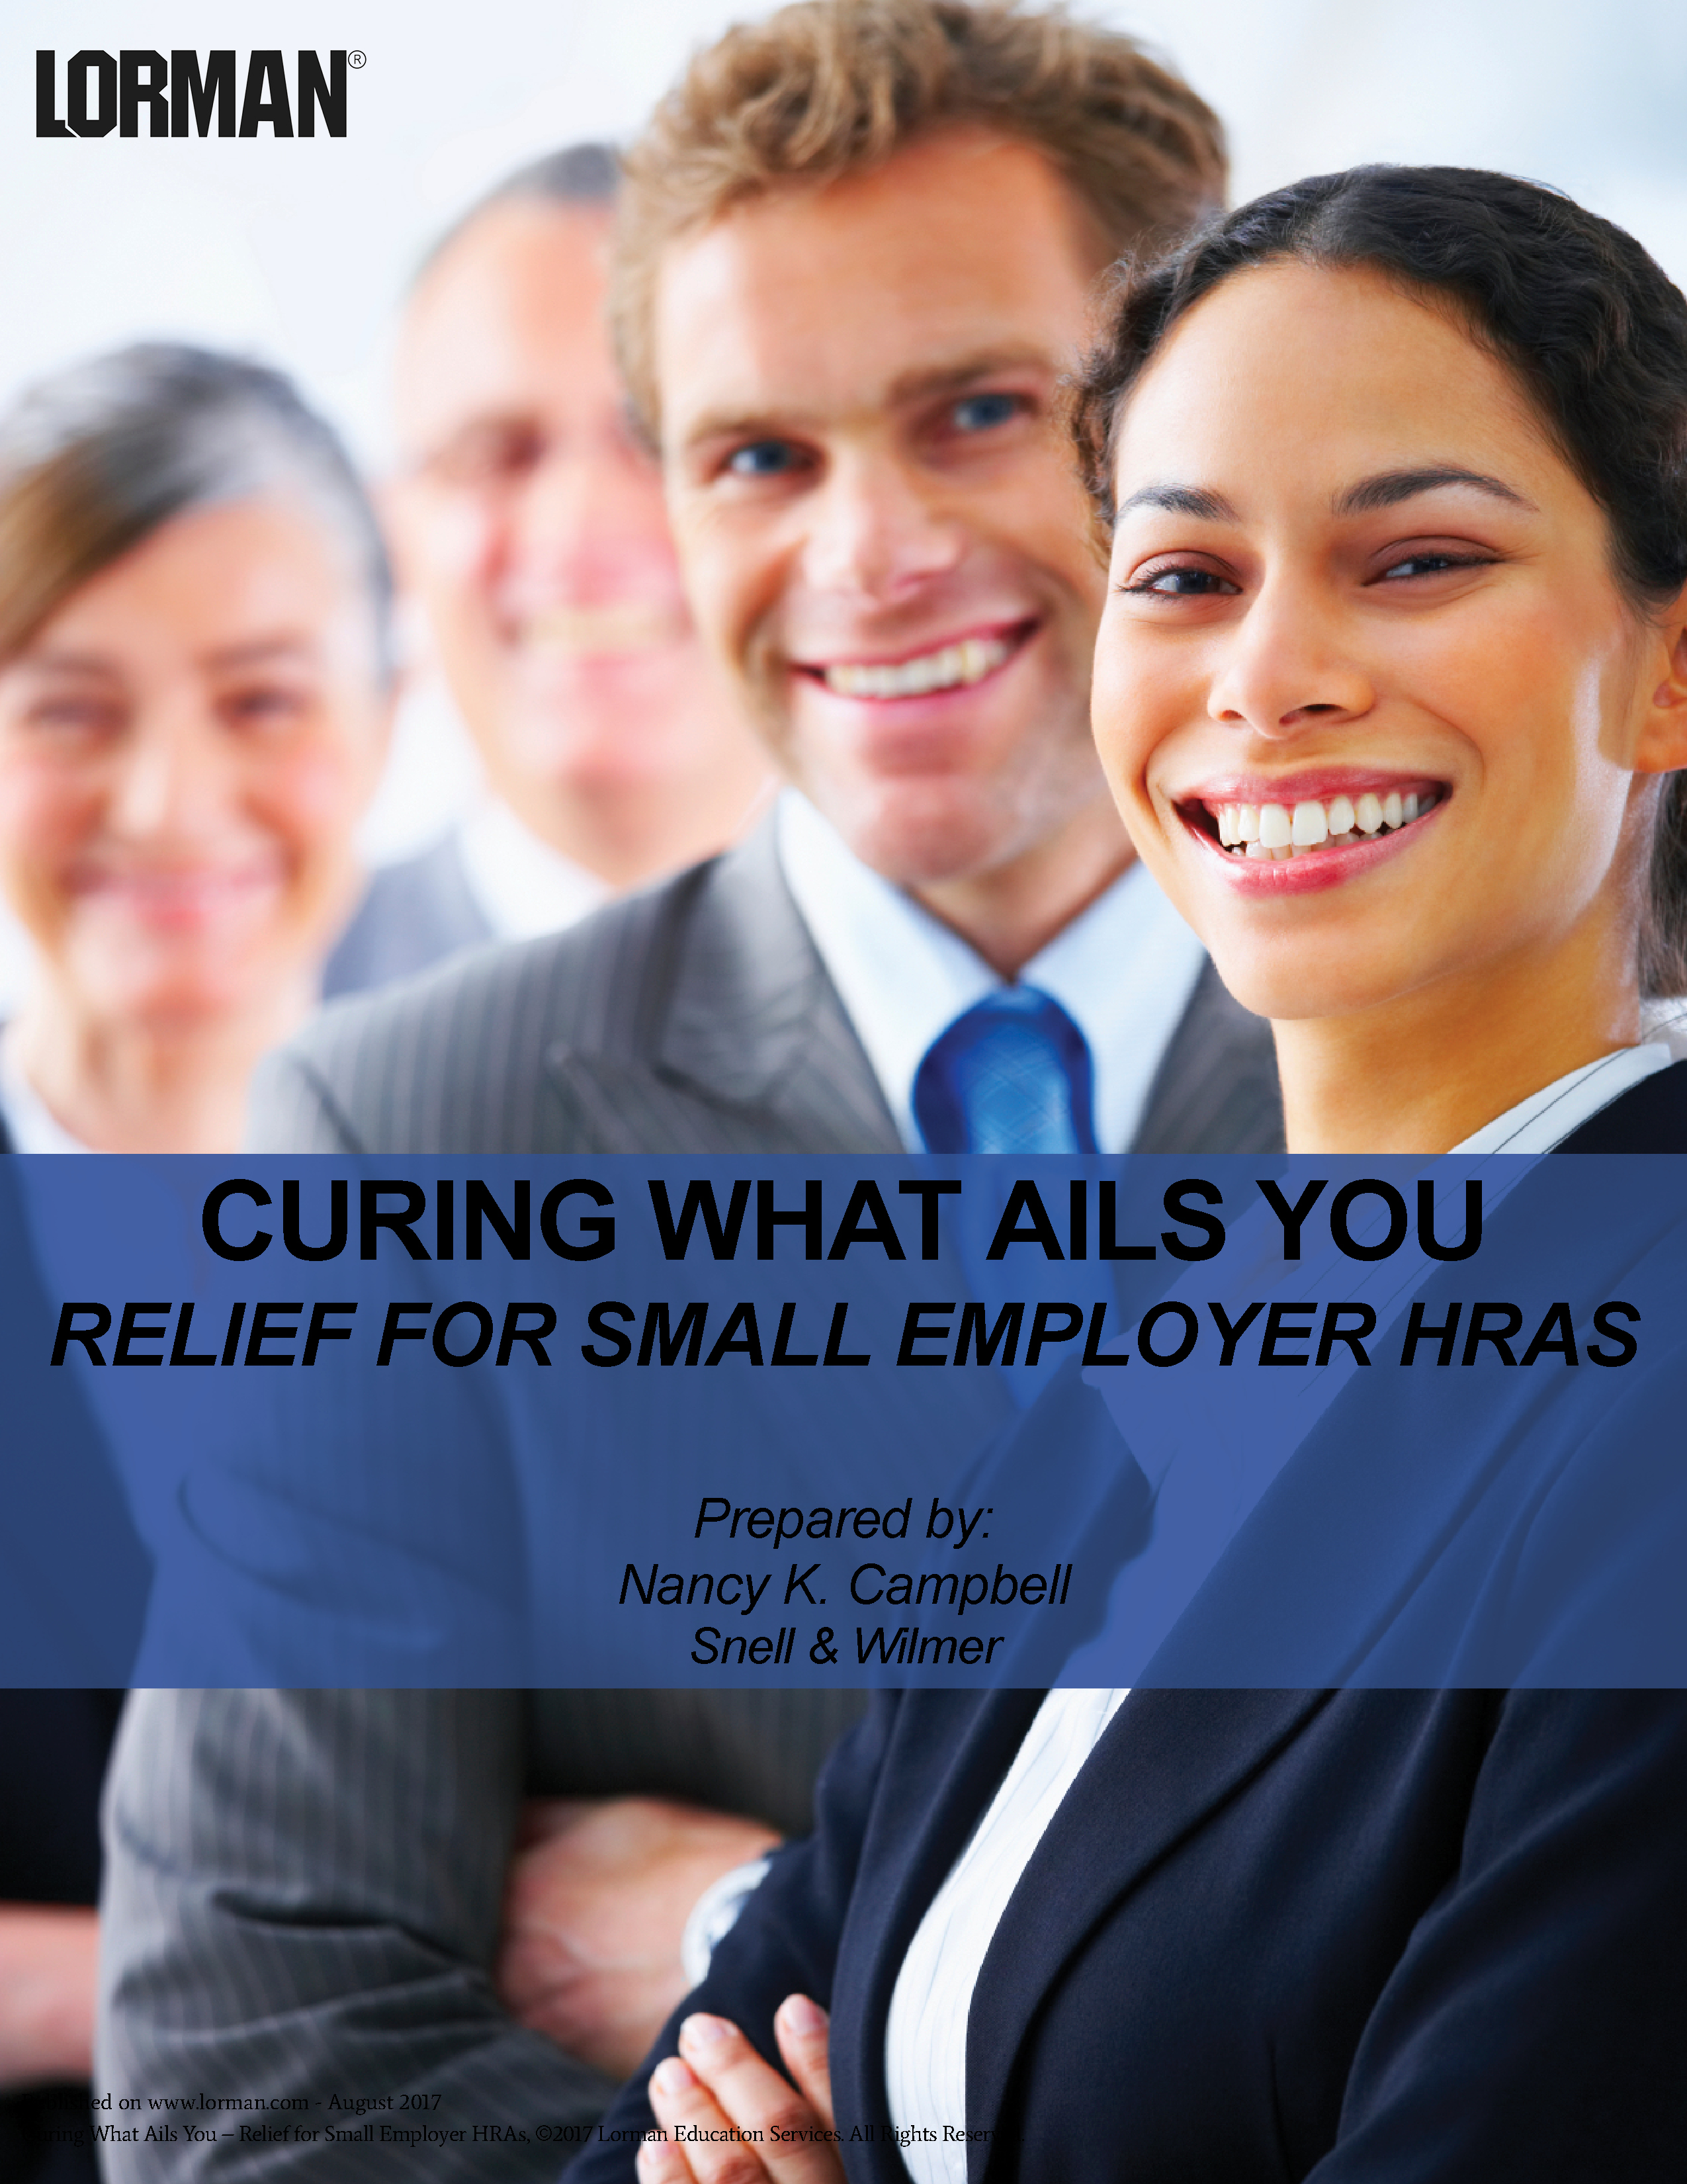 Curing What Ails You – Relief for Small Employer HRAs